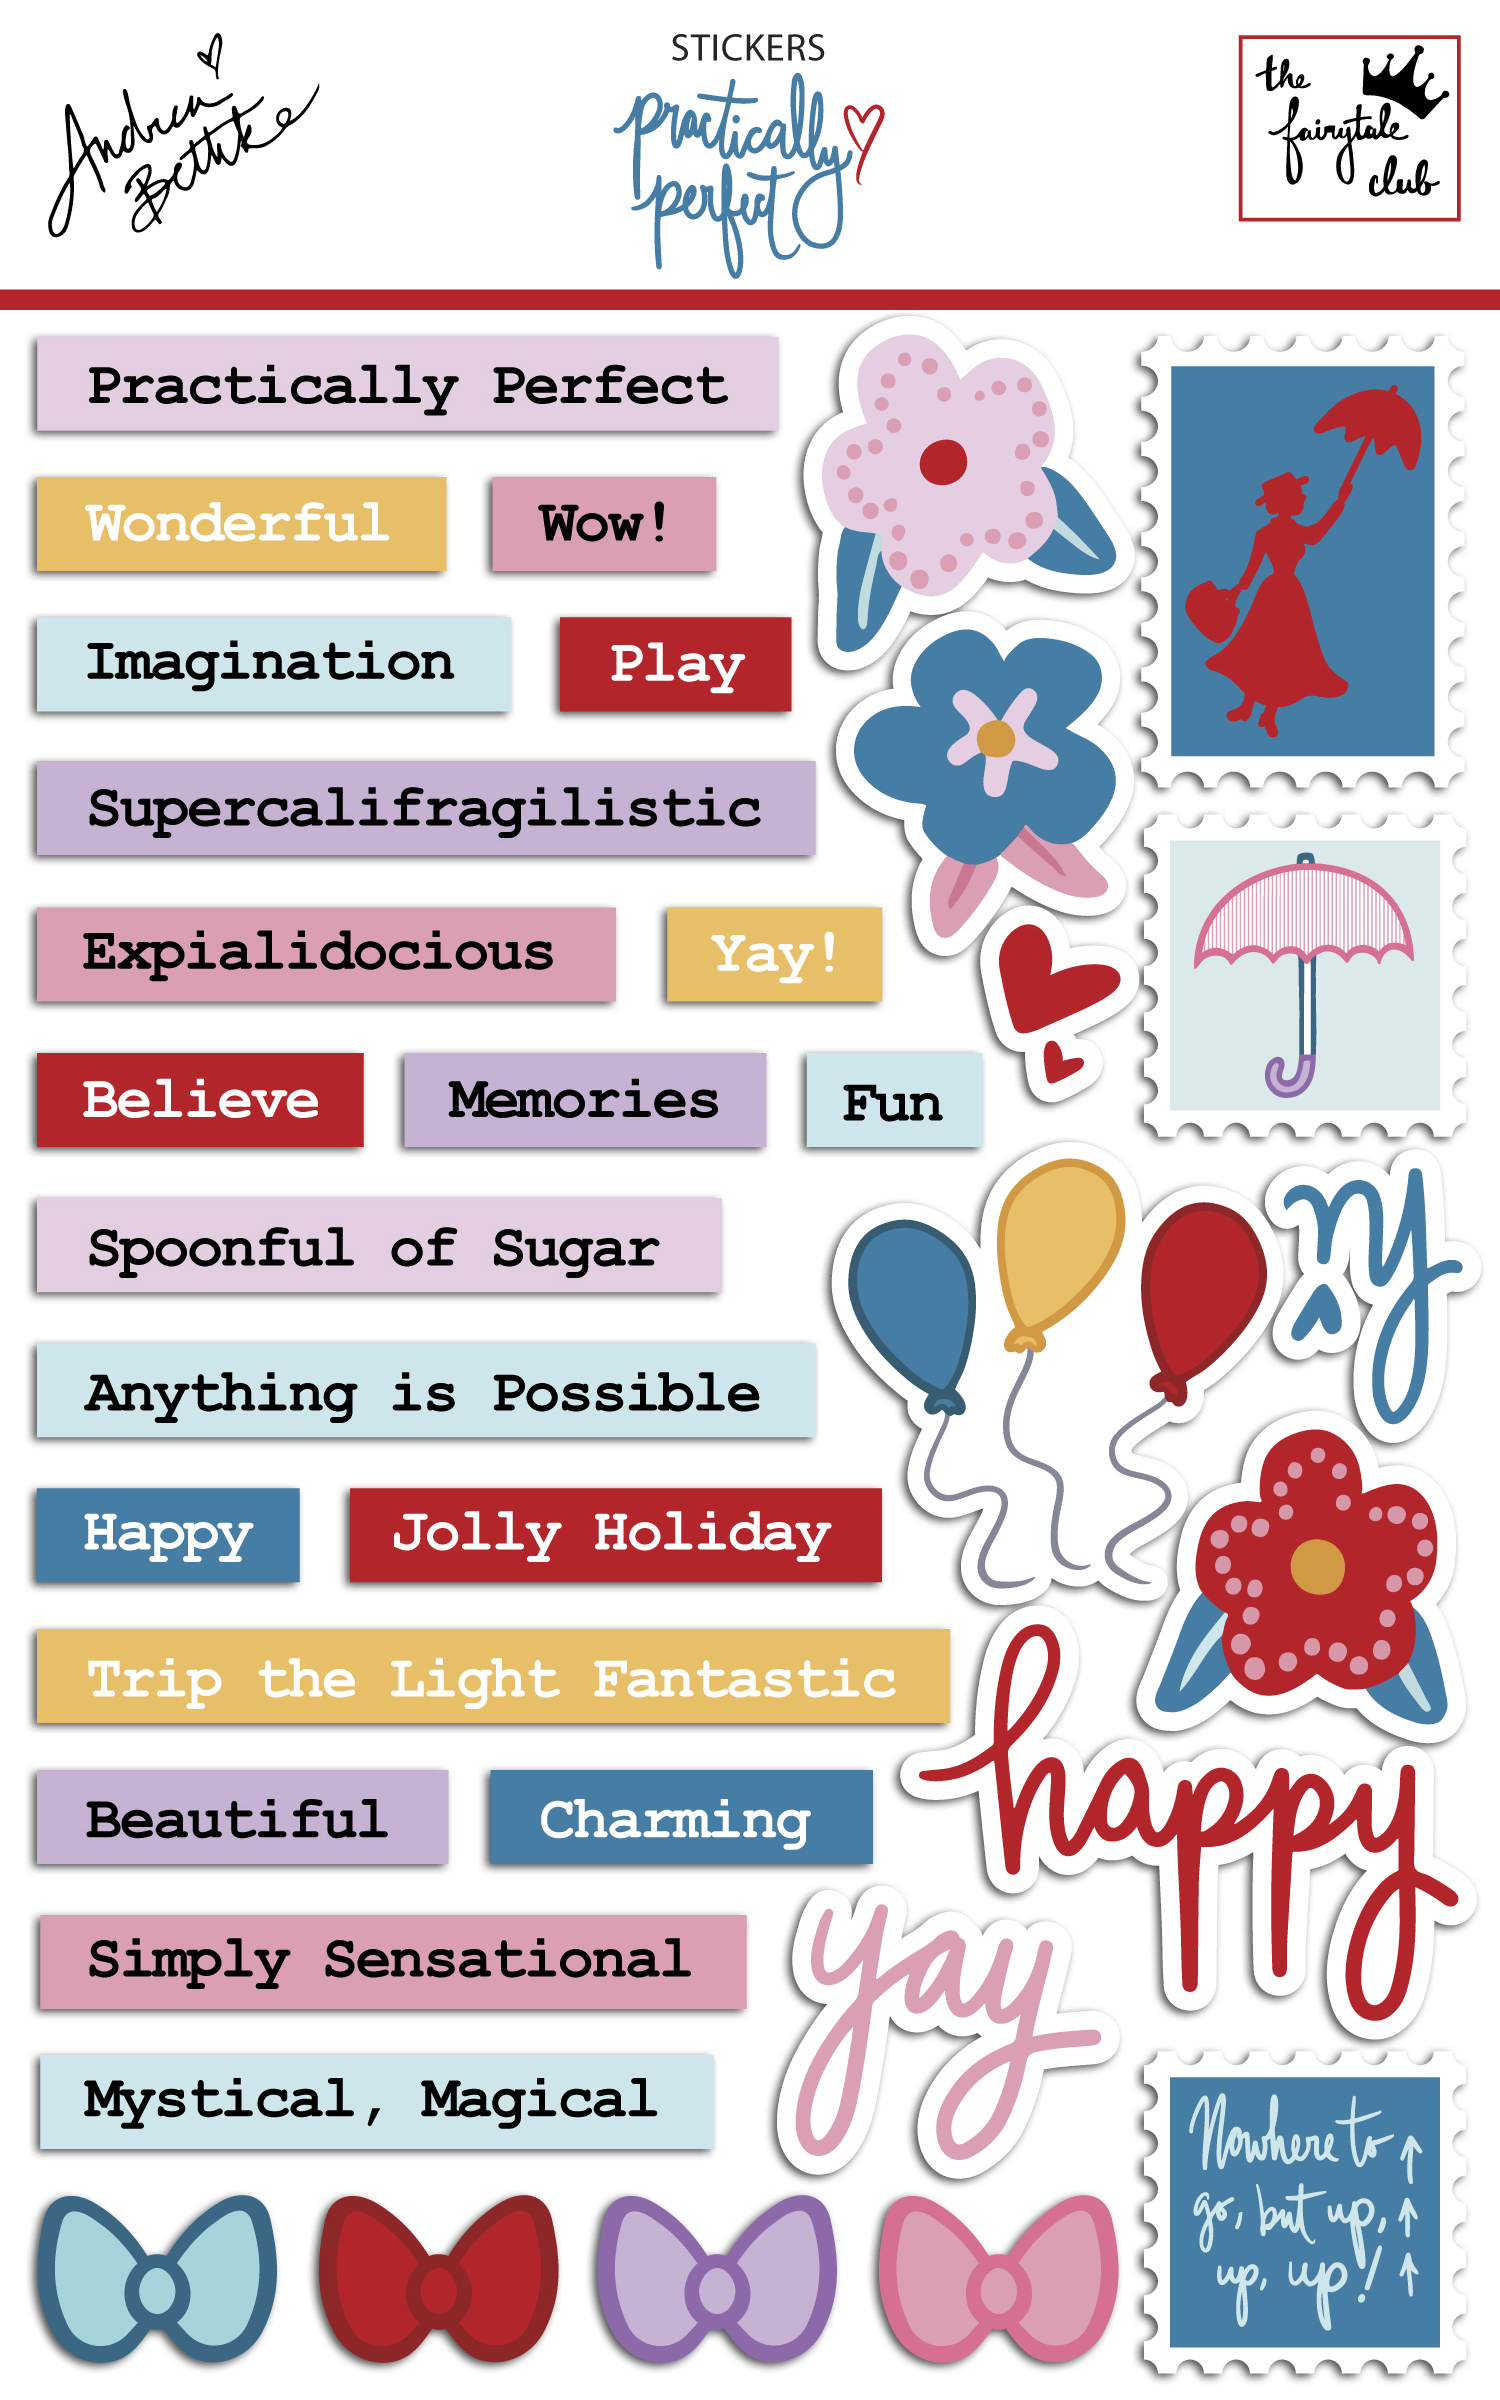 Practically Perfect - Sticker Sheet total package.jpg